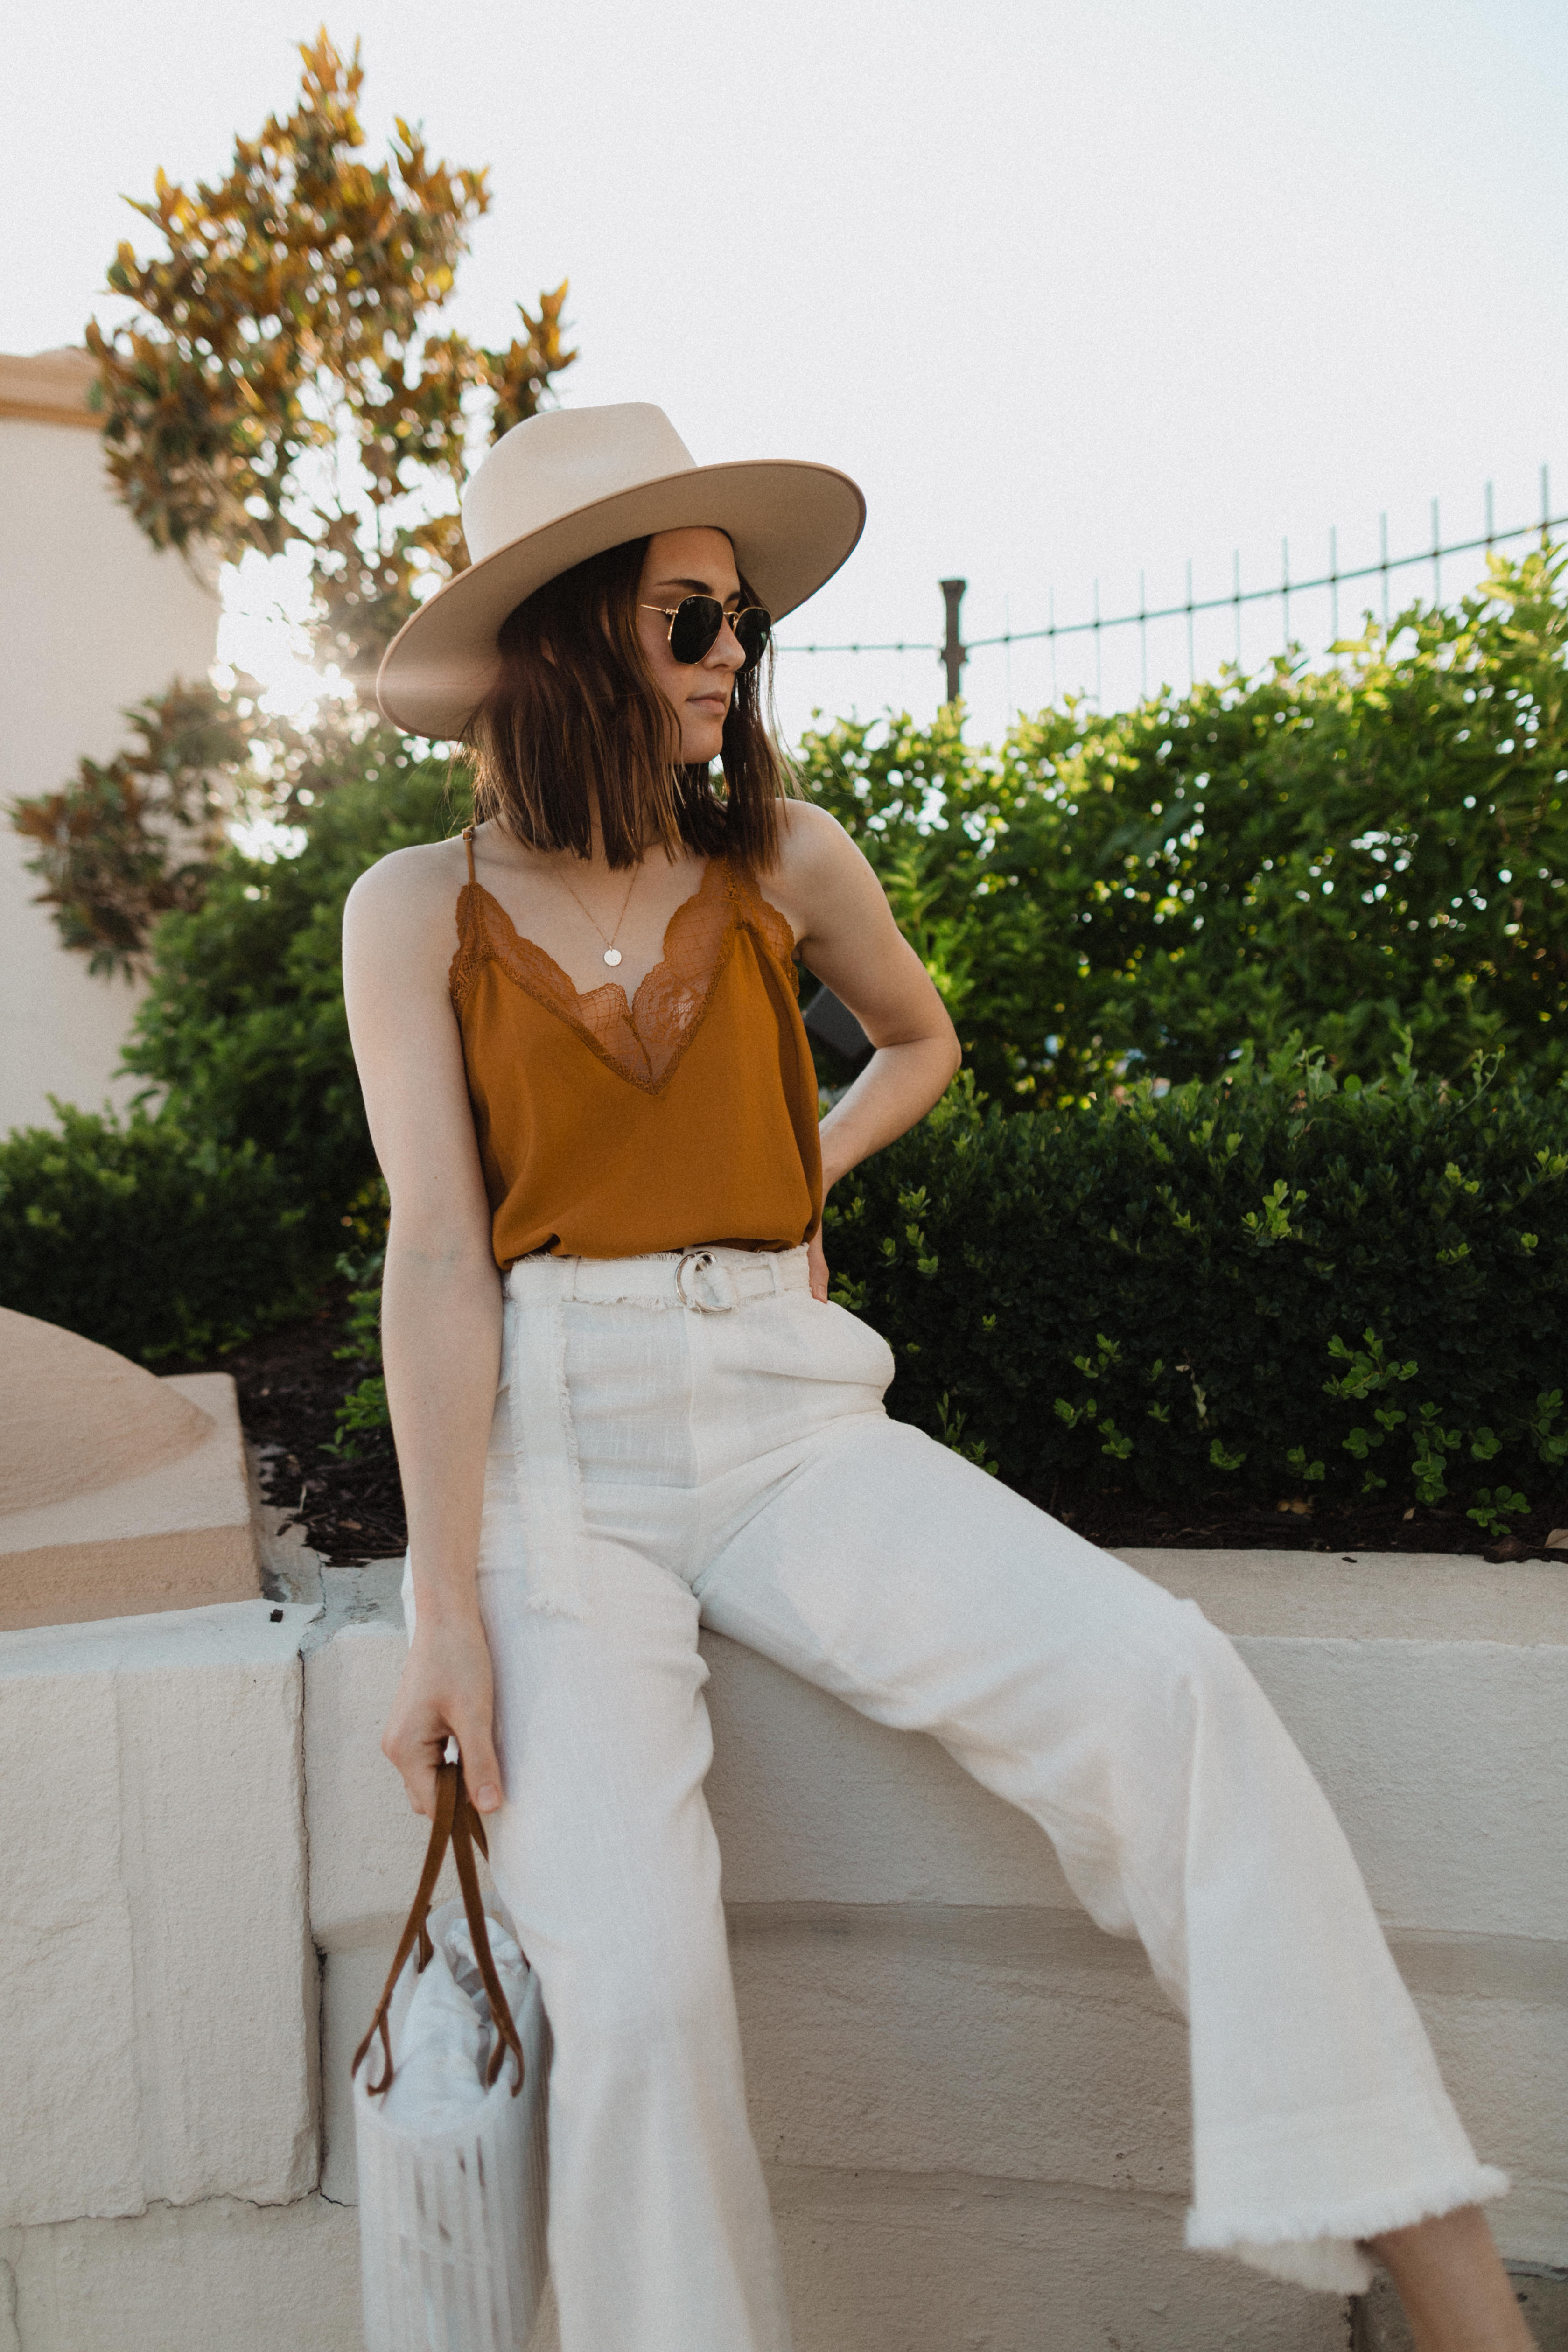 Lovestitch Clothing: 7 Outfits To Wear This Summer | linen pants outfit summer | lace camisole outfit 